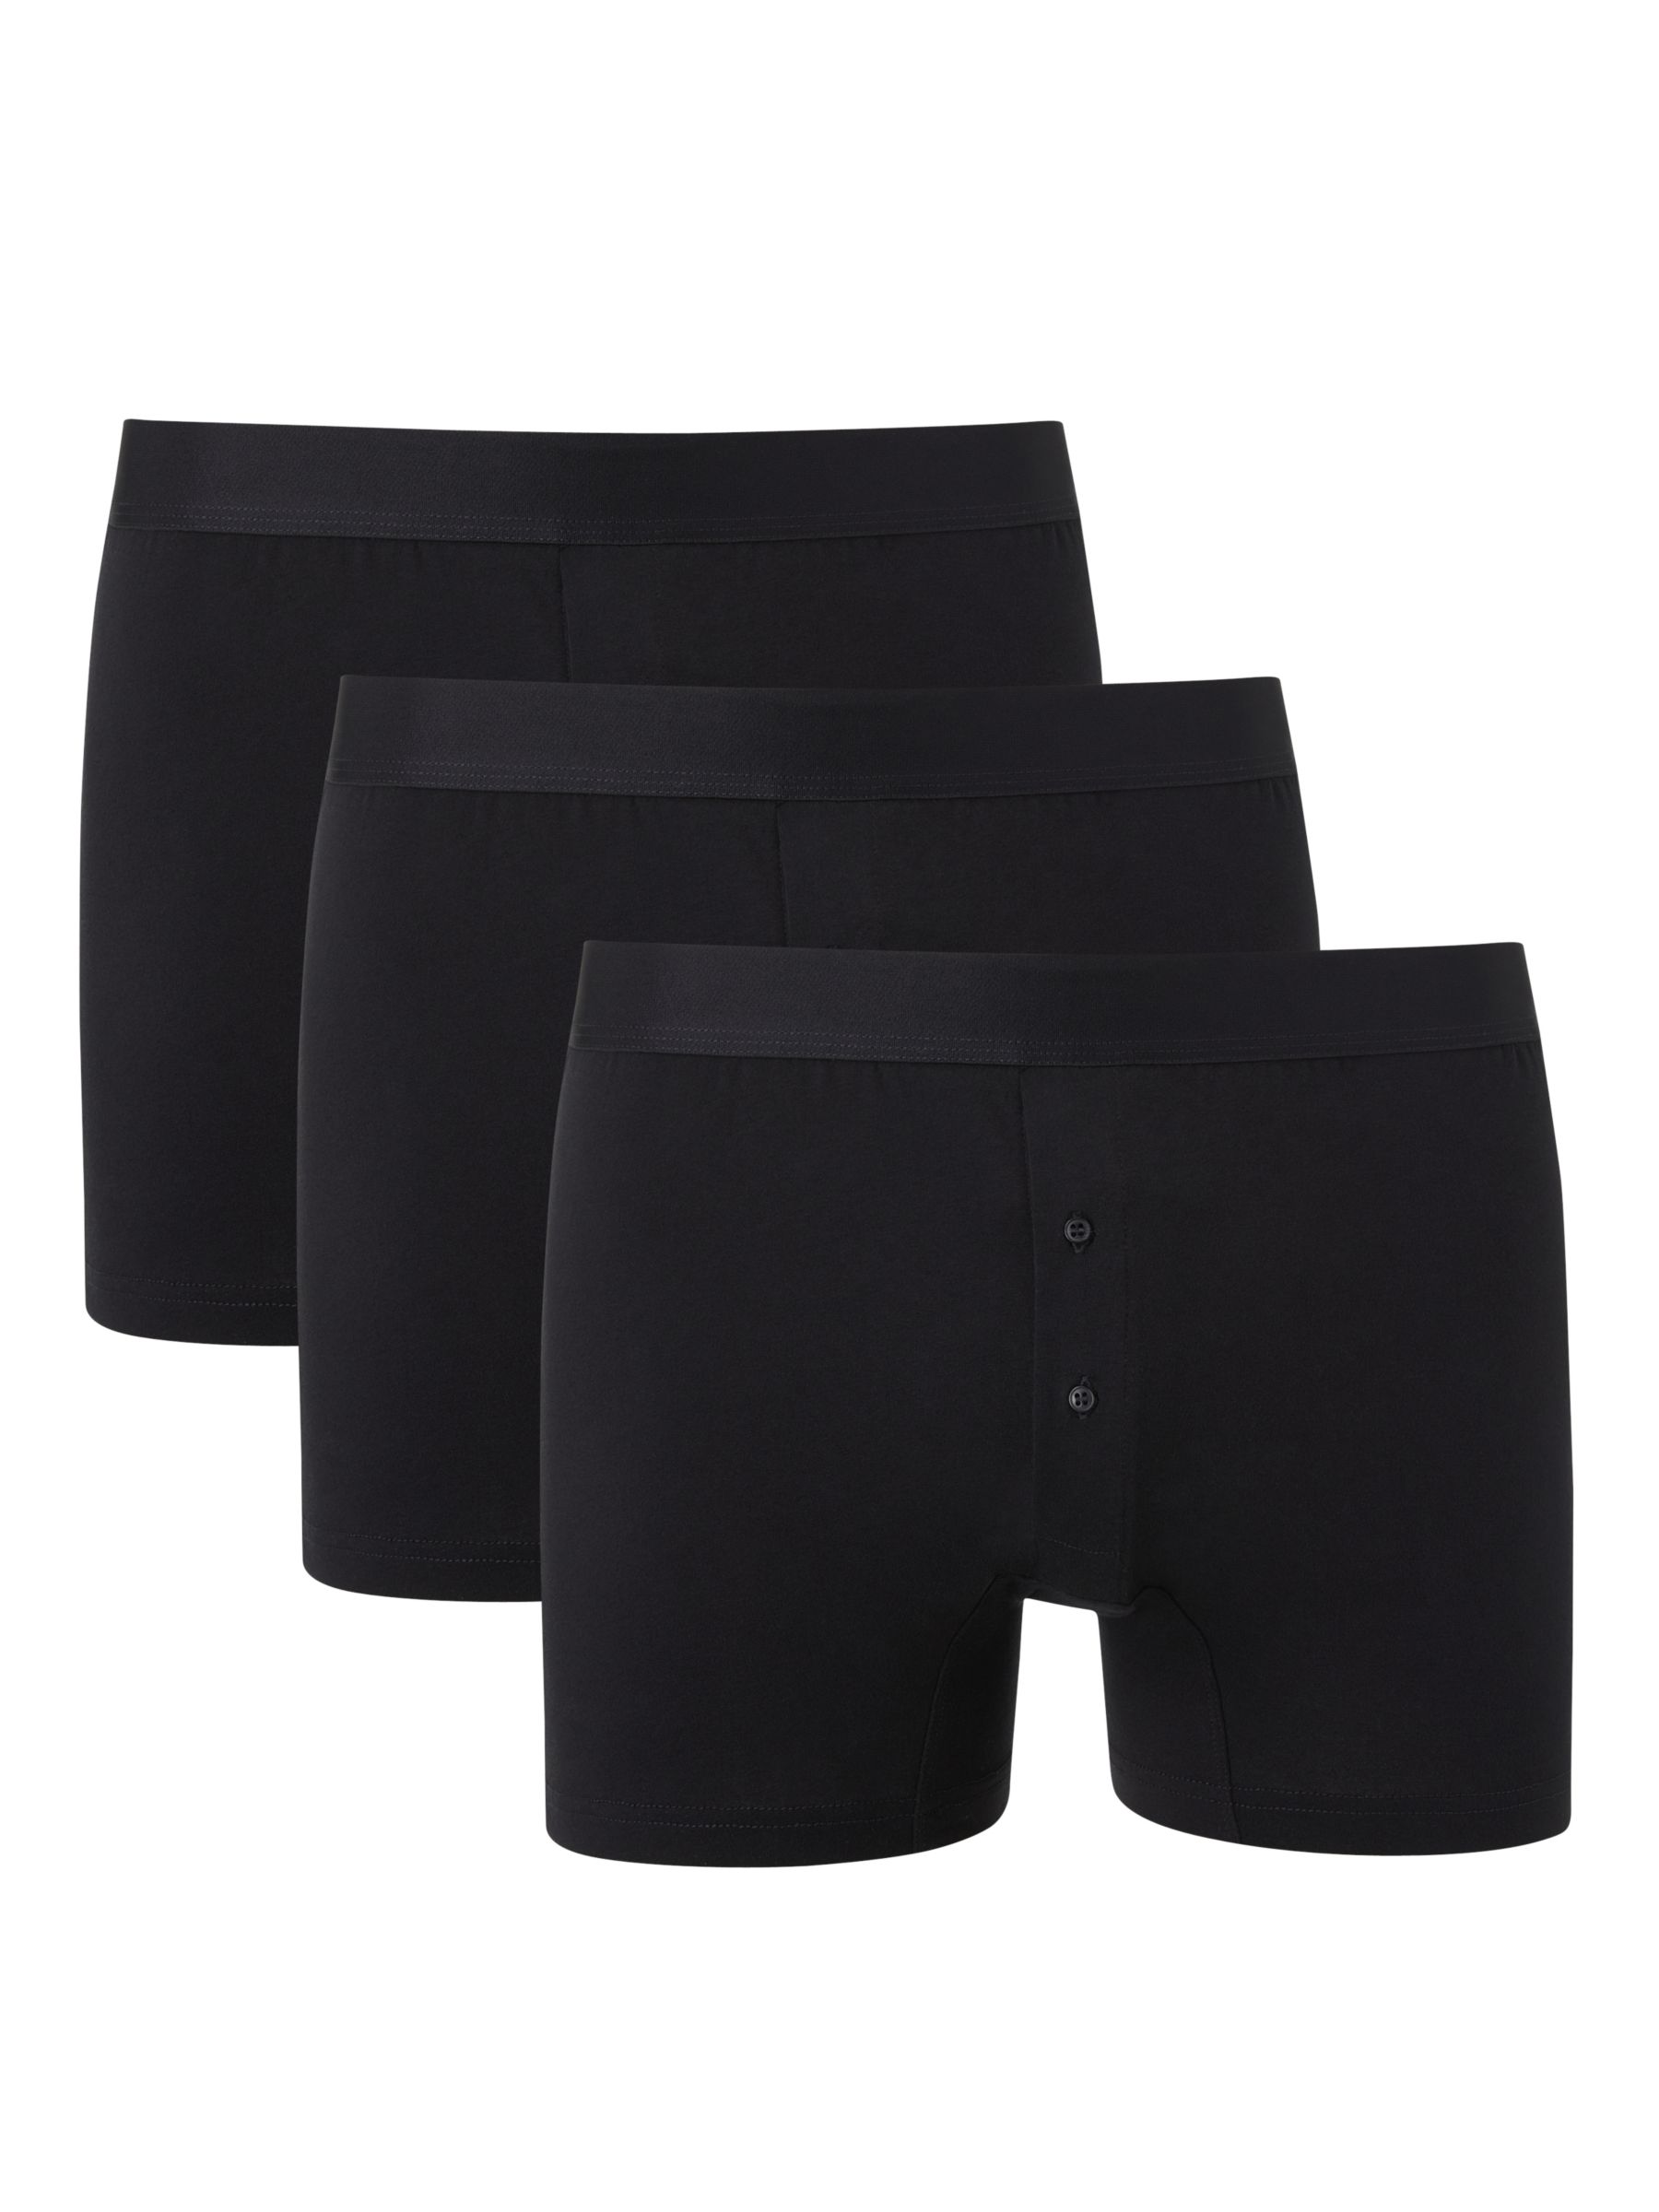 John Lewis Organic Cotton Button Fly Trunks, Pack of 3, Black at